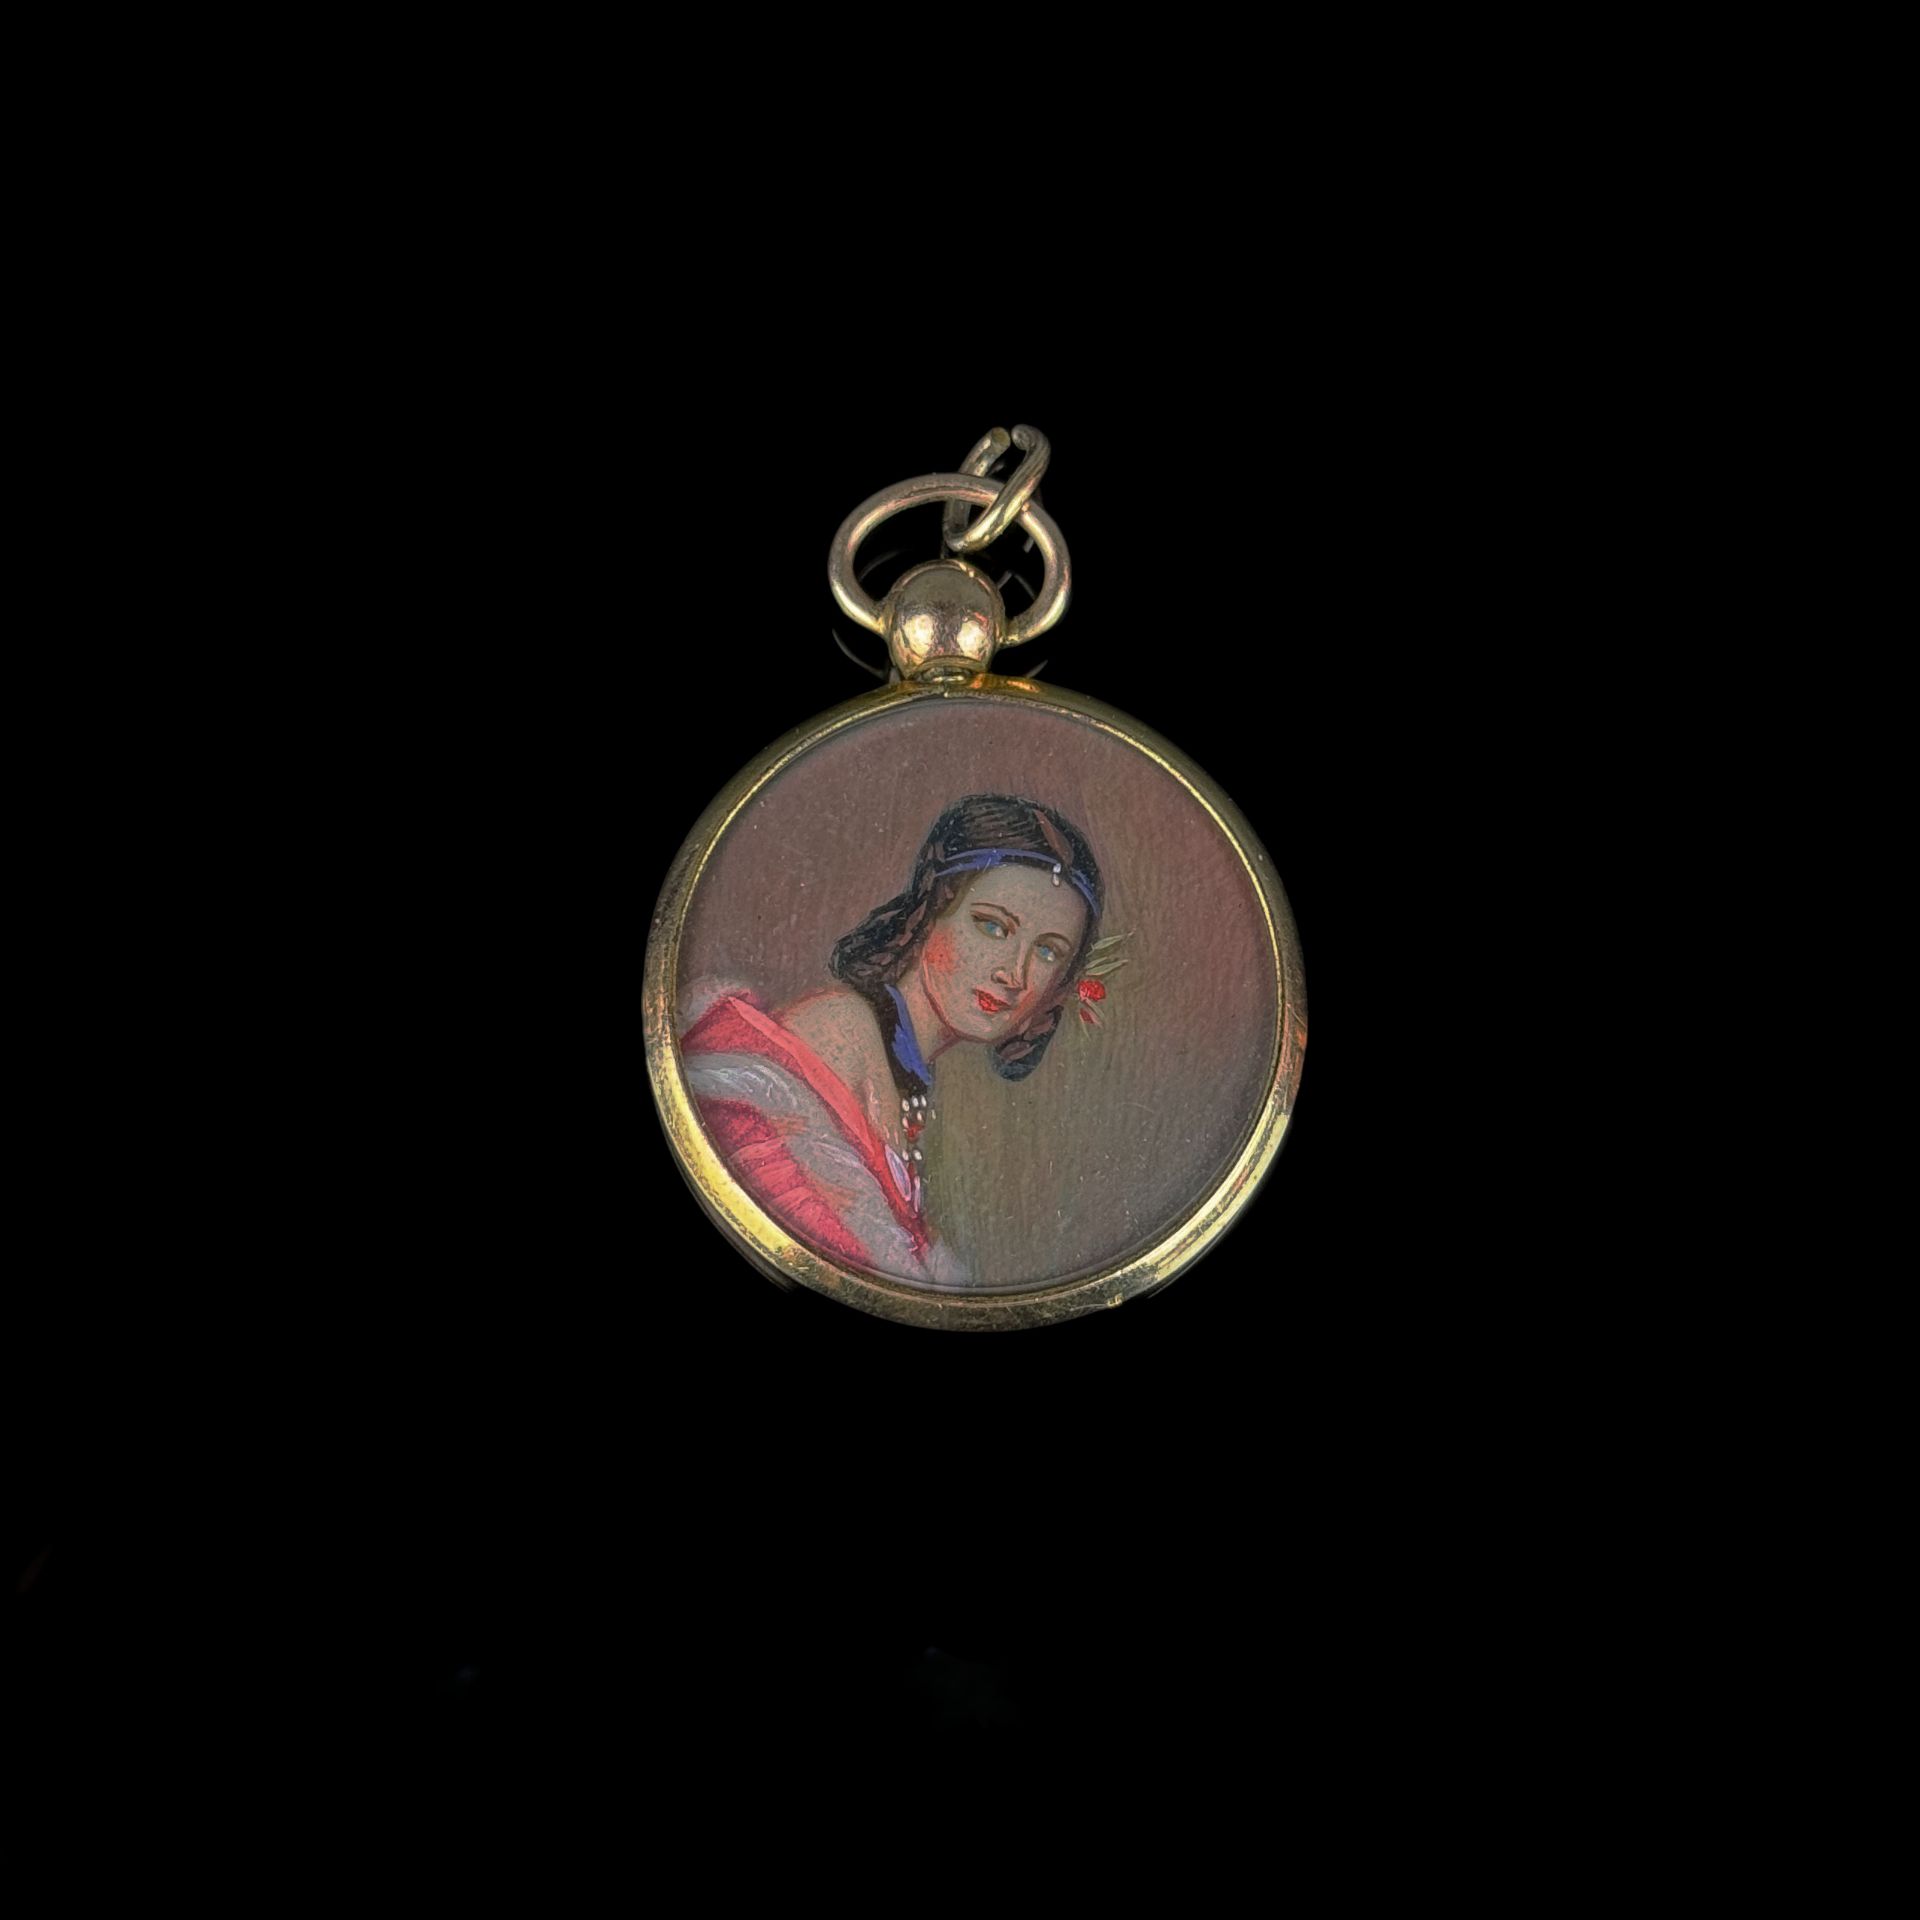 Antique pendant, gold-plated, total weight 4g, finely painted portrait of a lady on one side, set w